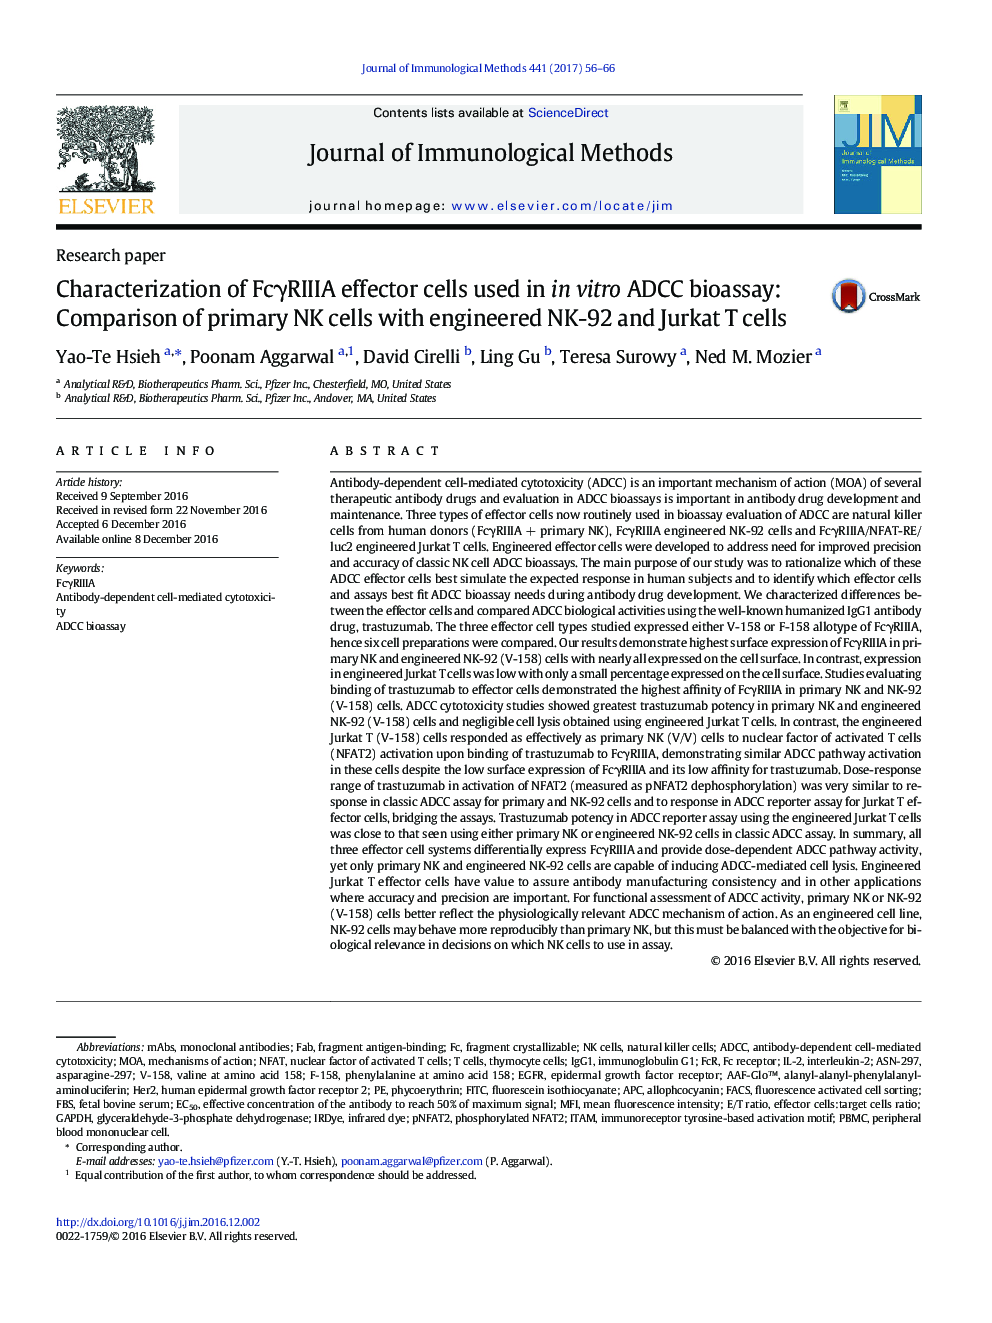 Research paperCharacterization of FcÎ³RIIIA effector cells used in in vitro ADCC bioassay: Comparison of primary NK cells with engineered NK-92 and Jurkat T cells